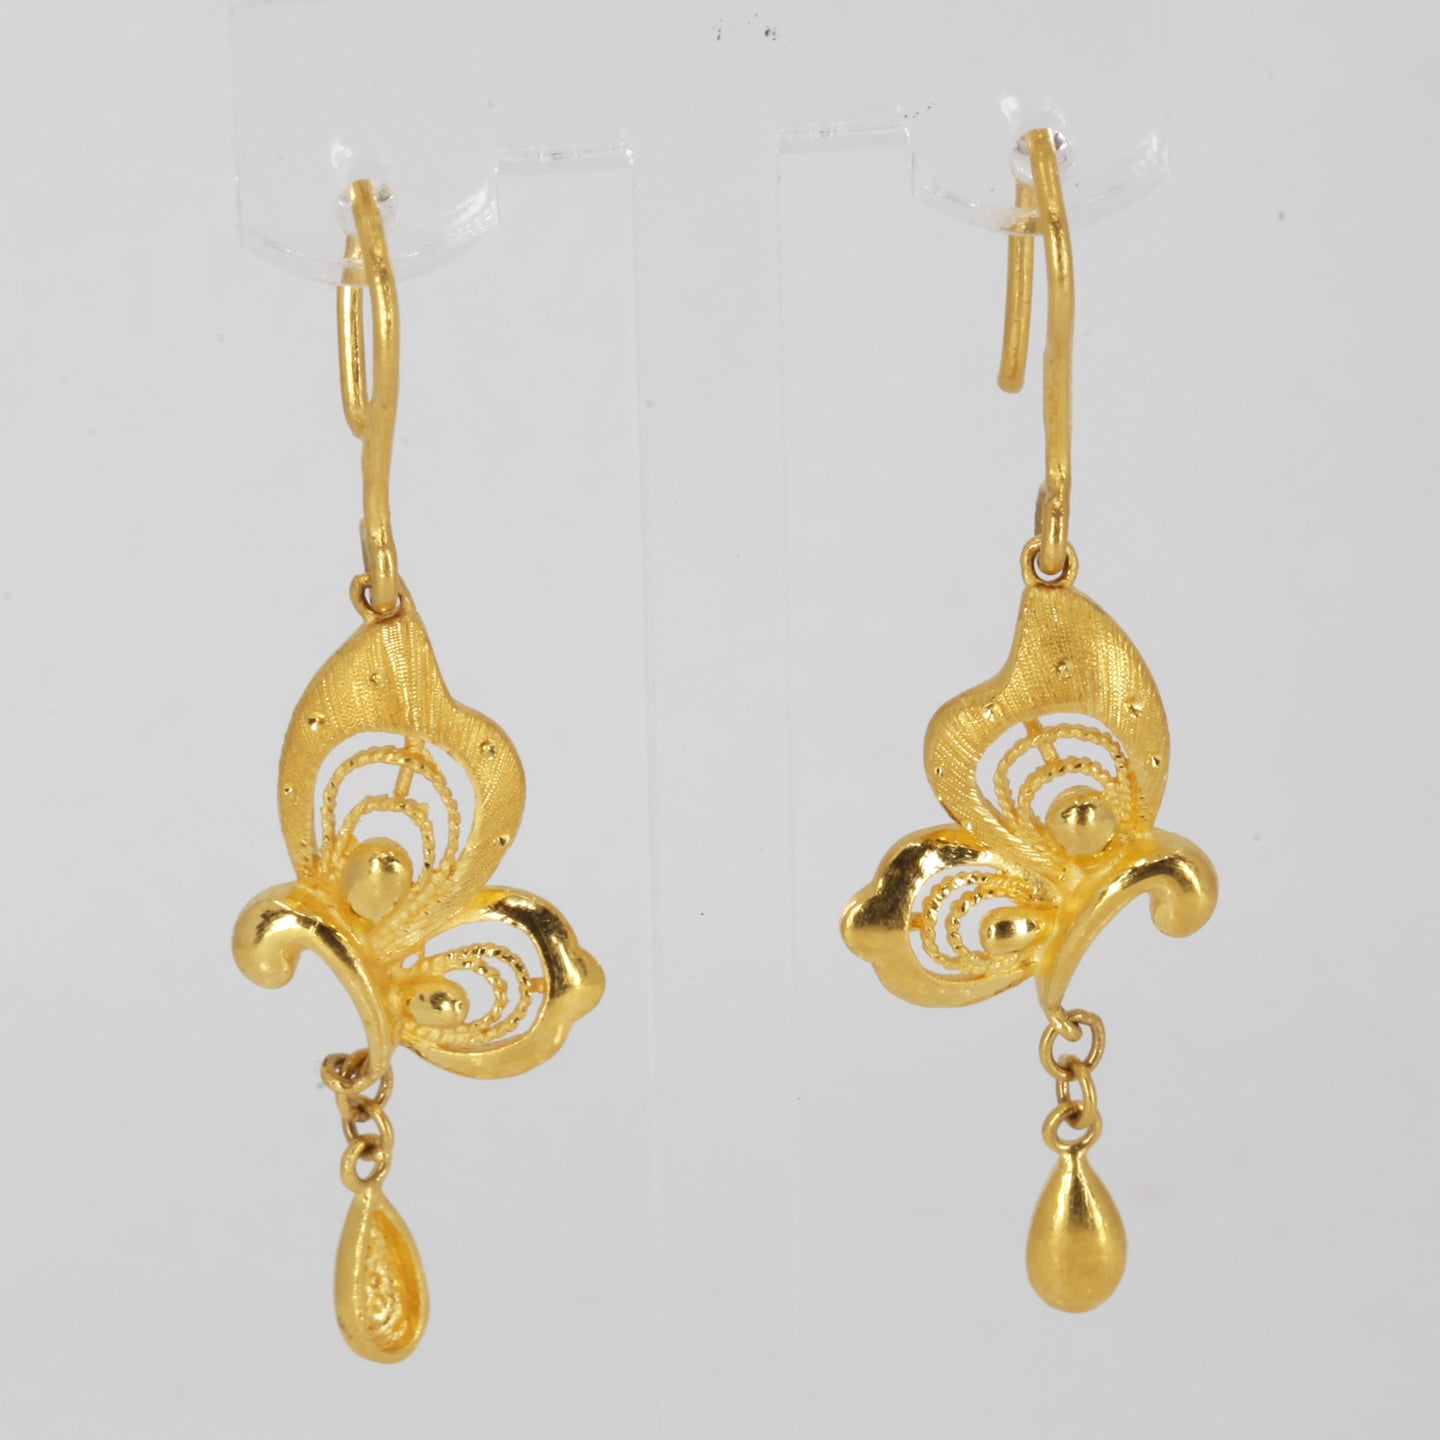 24K Solid Yellow Gold Butterfly Hanging Earrings 7.4 Grams